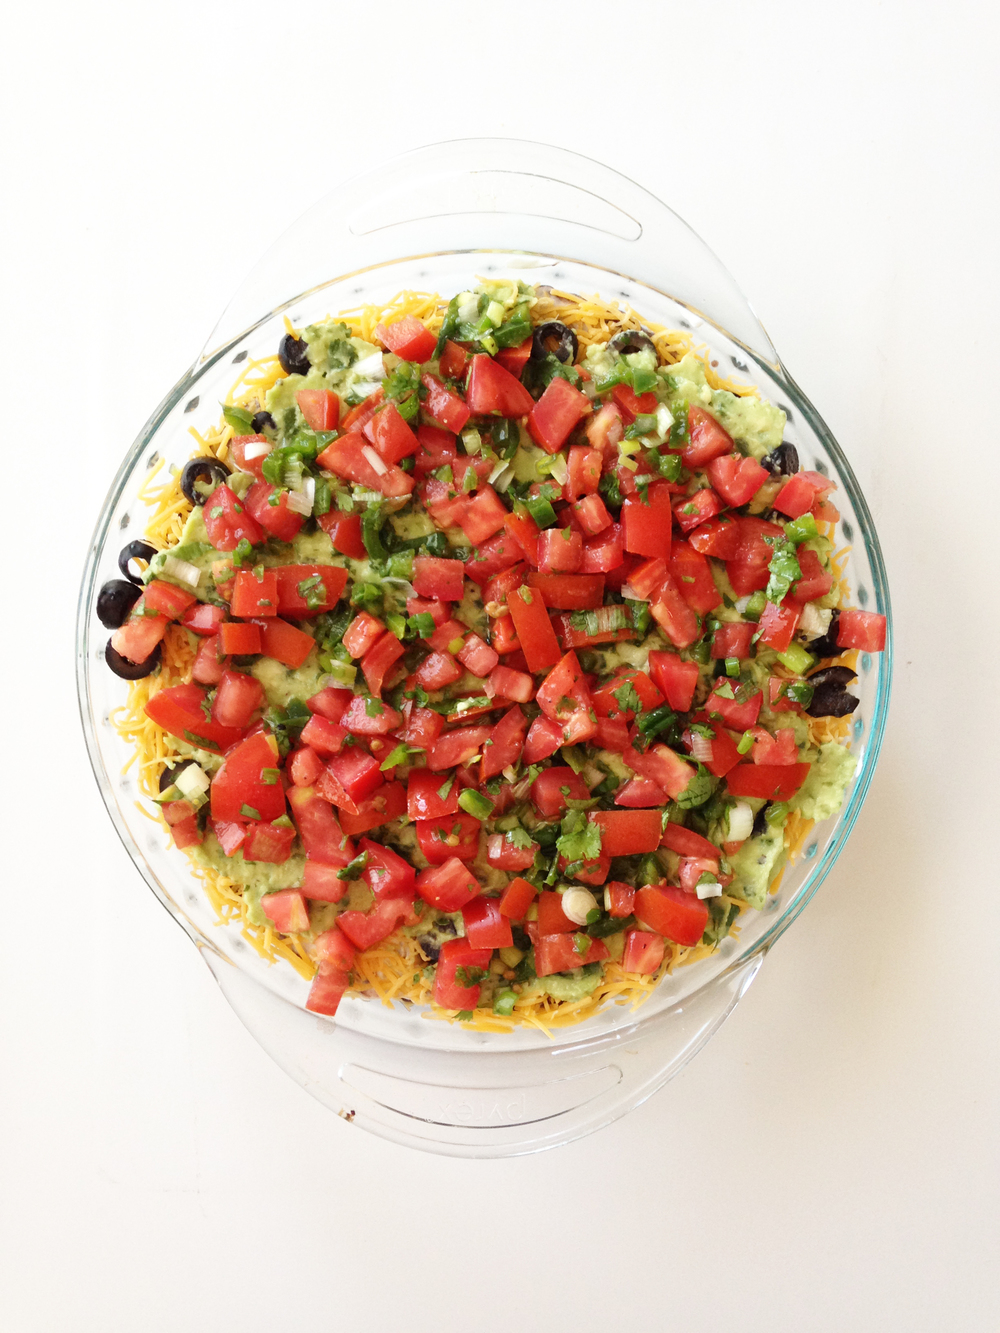 healthified 7 layer dip